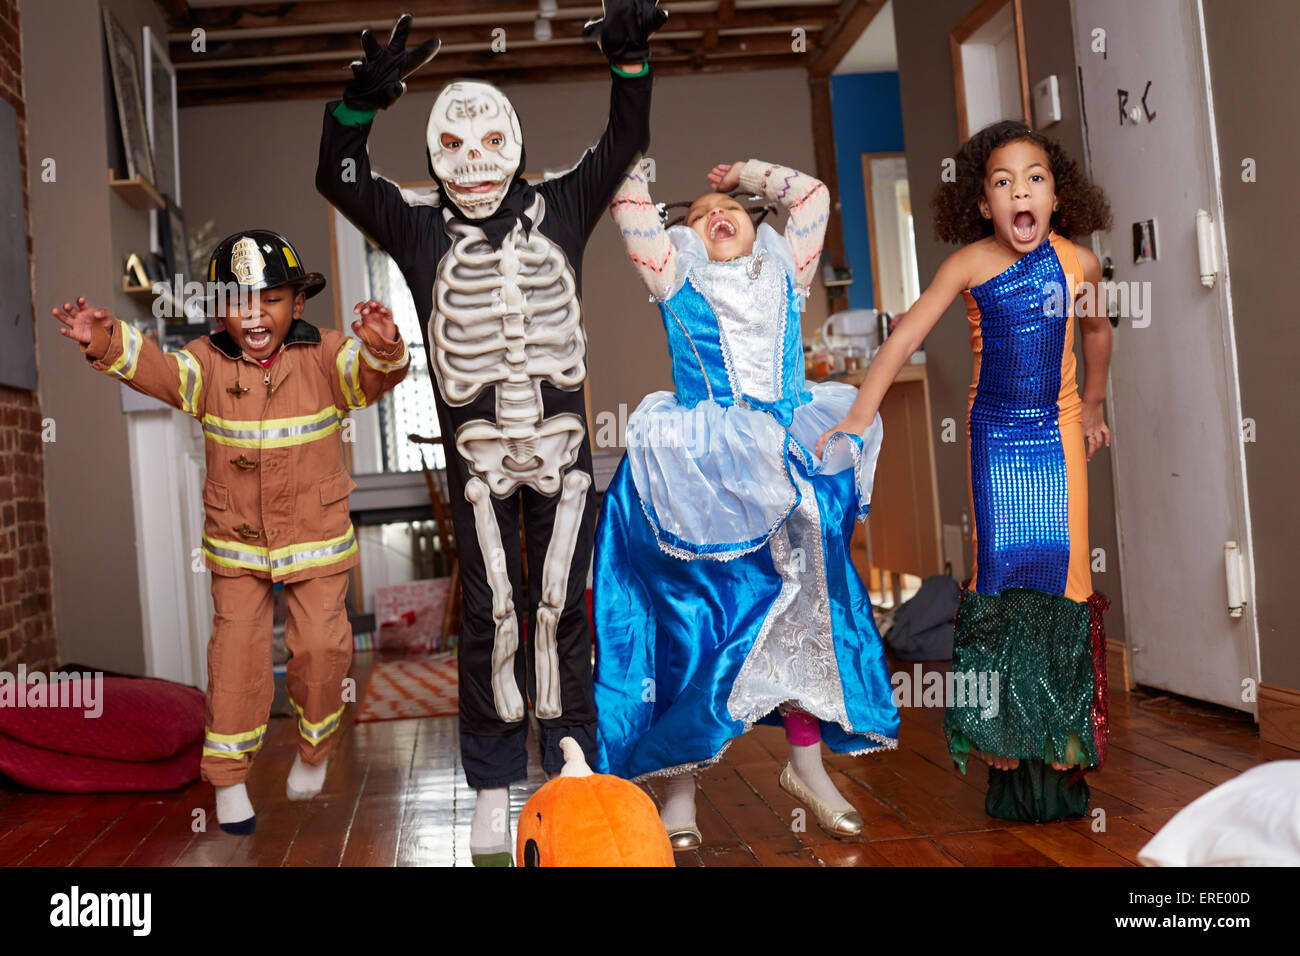 Children in Halloween costumes jumping for joy Stock Photo